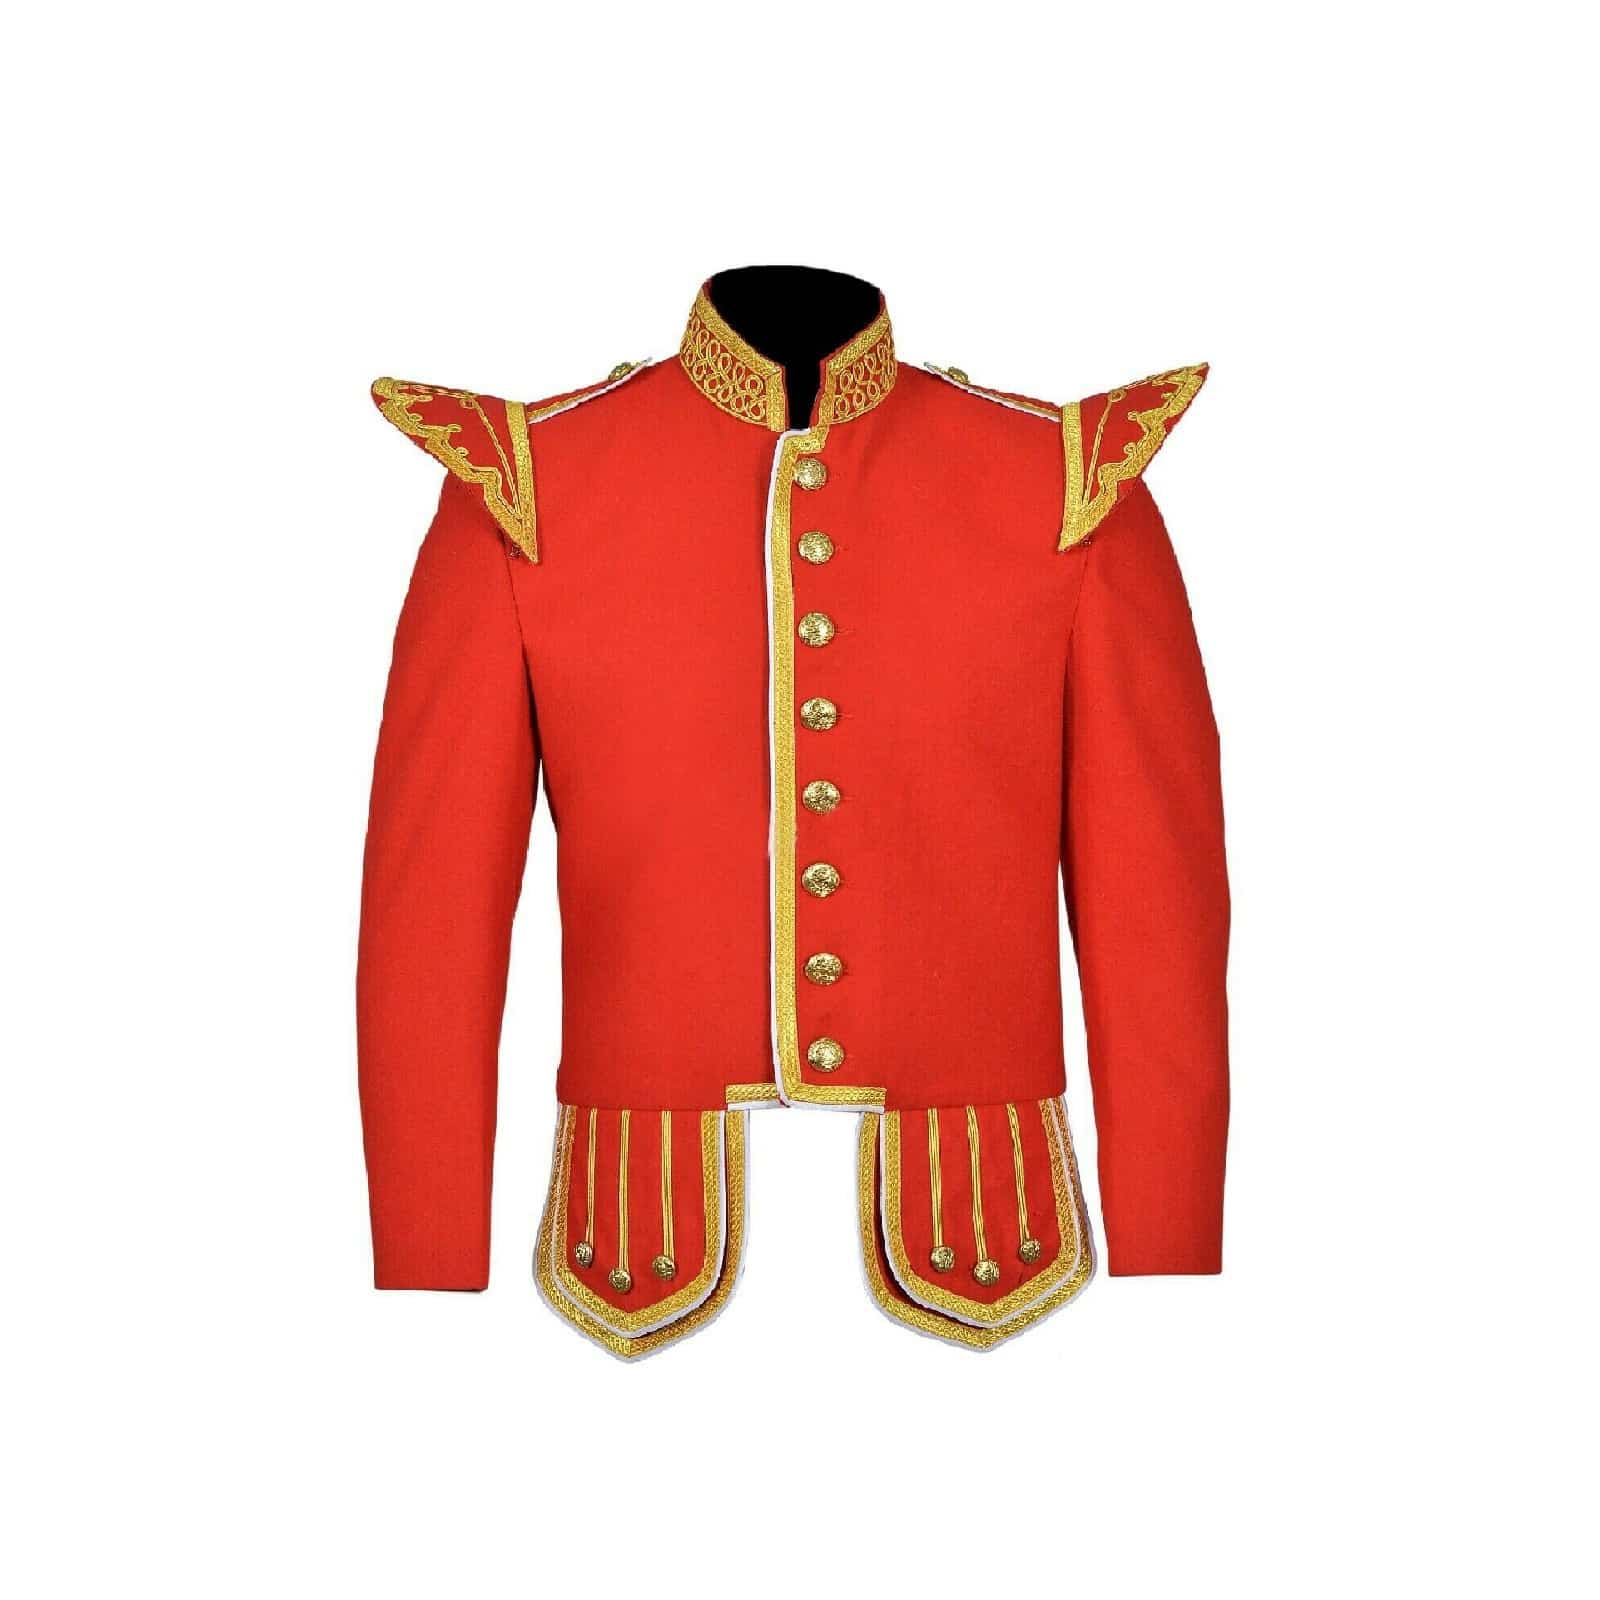 Red Pipe Band Doublet Drummer Jacket